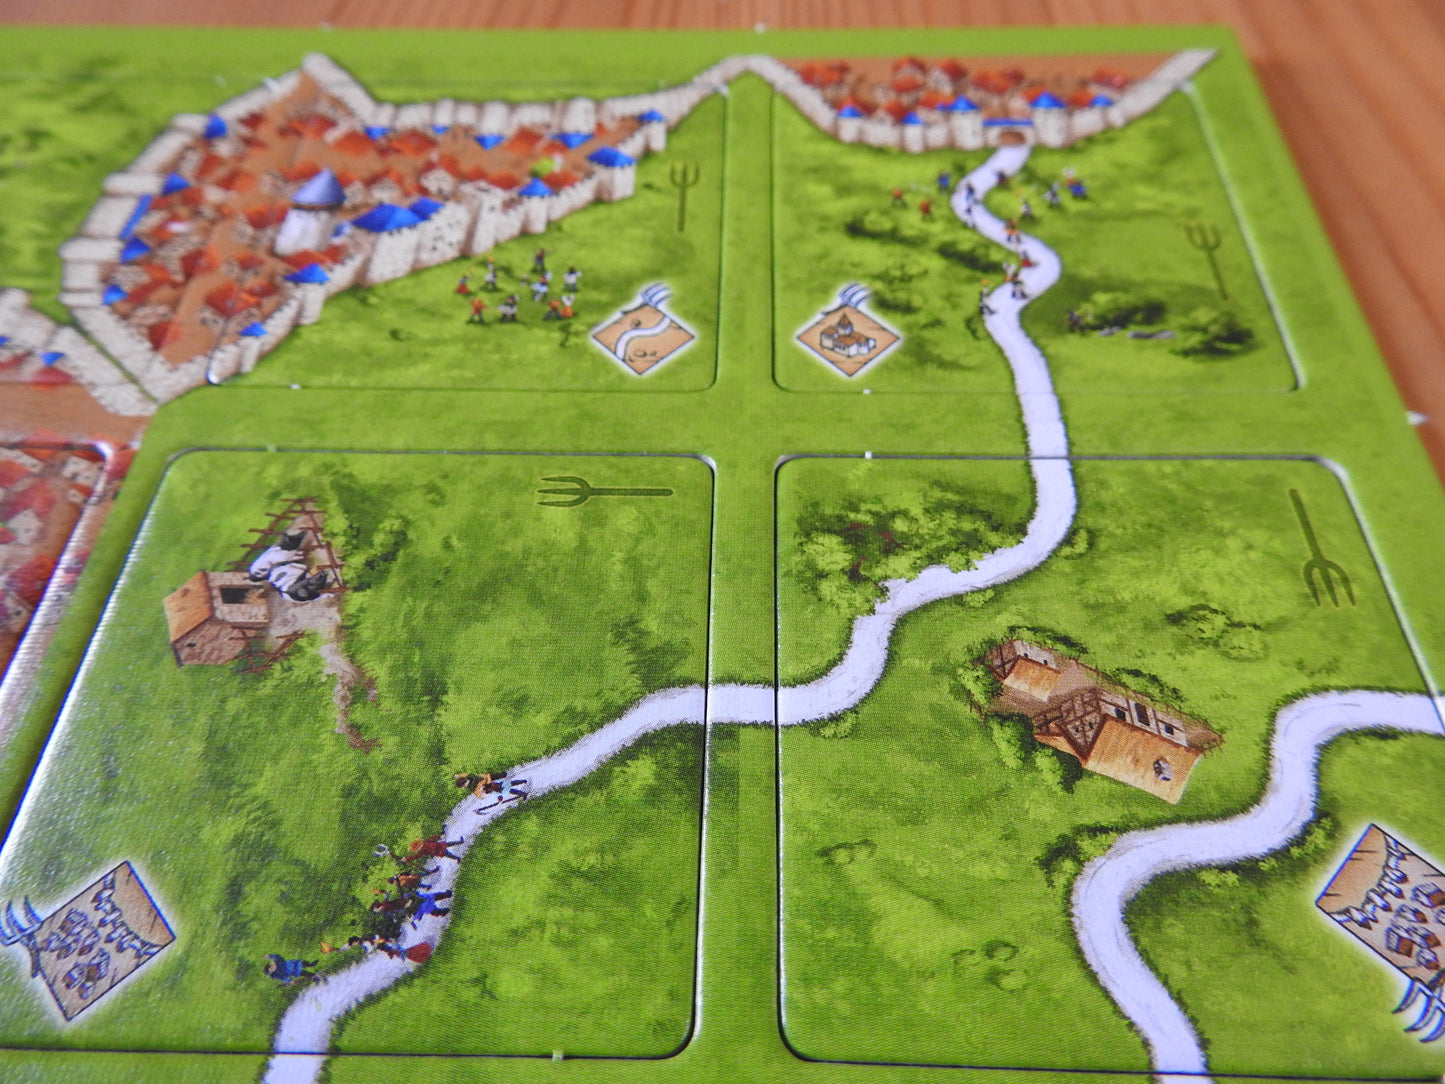 A further view of some of the included tiles, with village buildings and cities connected by roads in this Peasant Revolts mini expansion for Carcassonne.